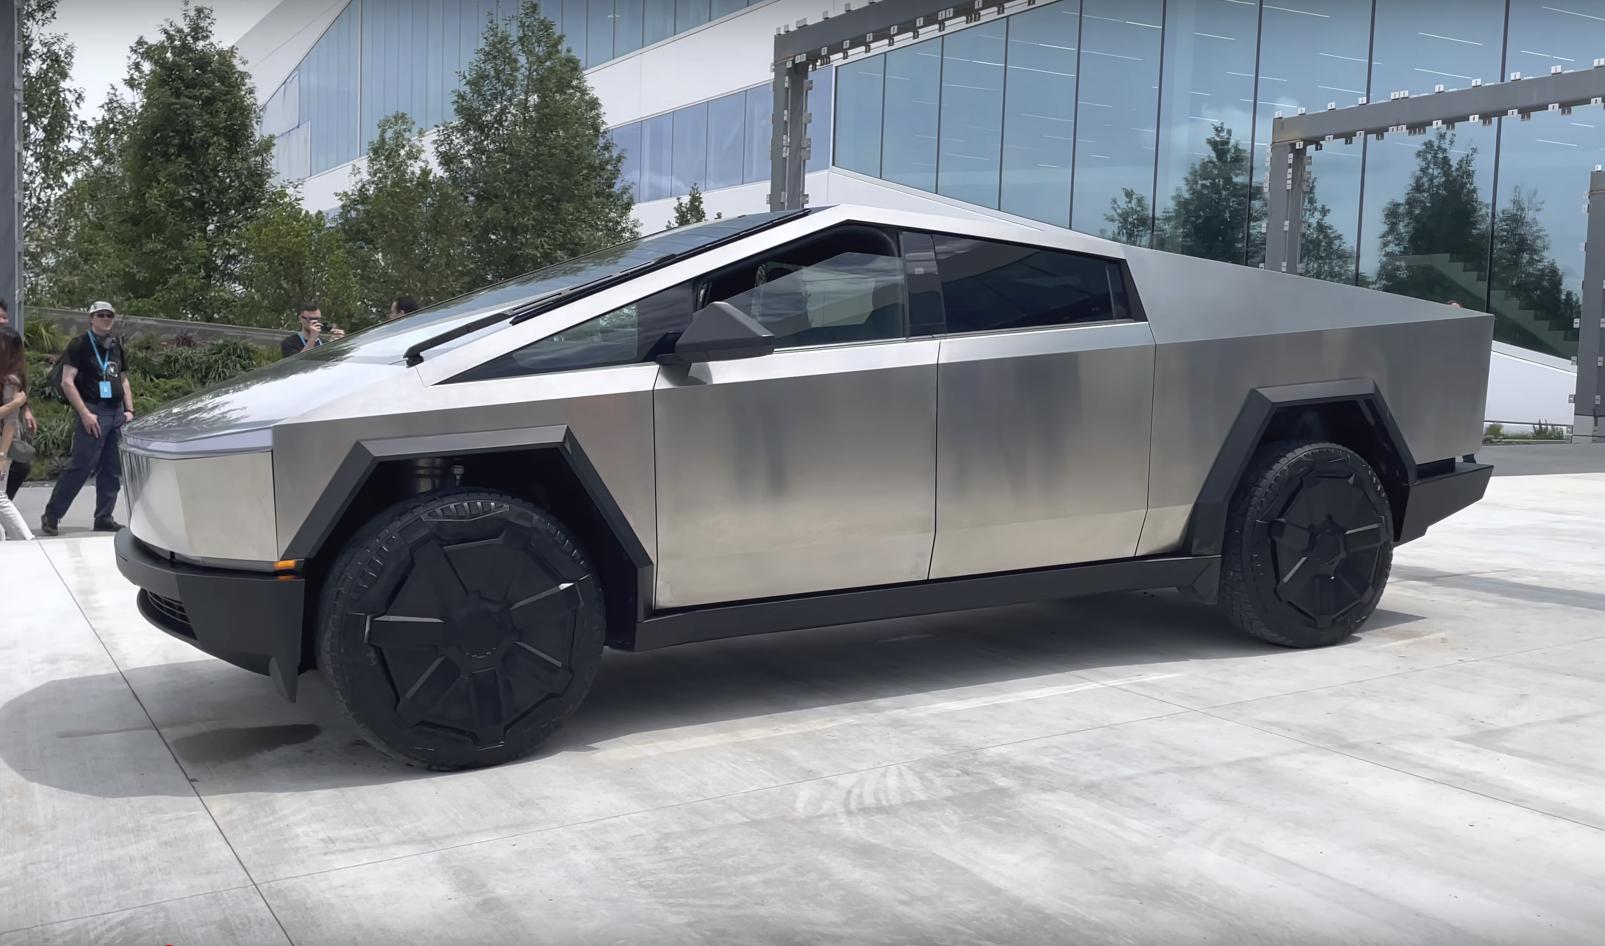 Latest Cybertruck videos show most complete version yet of Tesla's